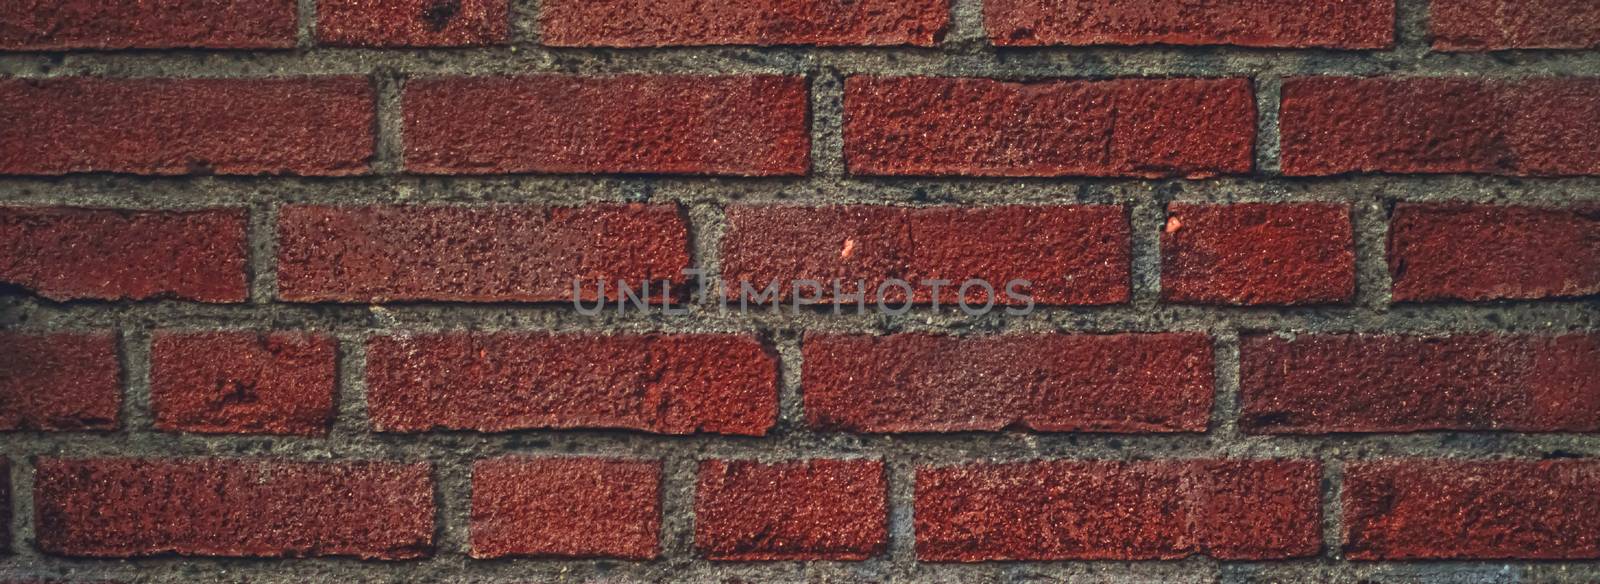 Red brick wall texture as background by Anneleven